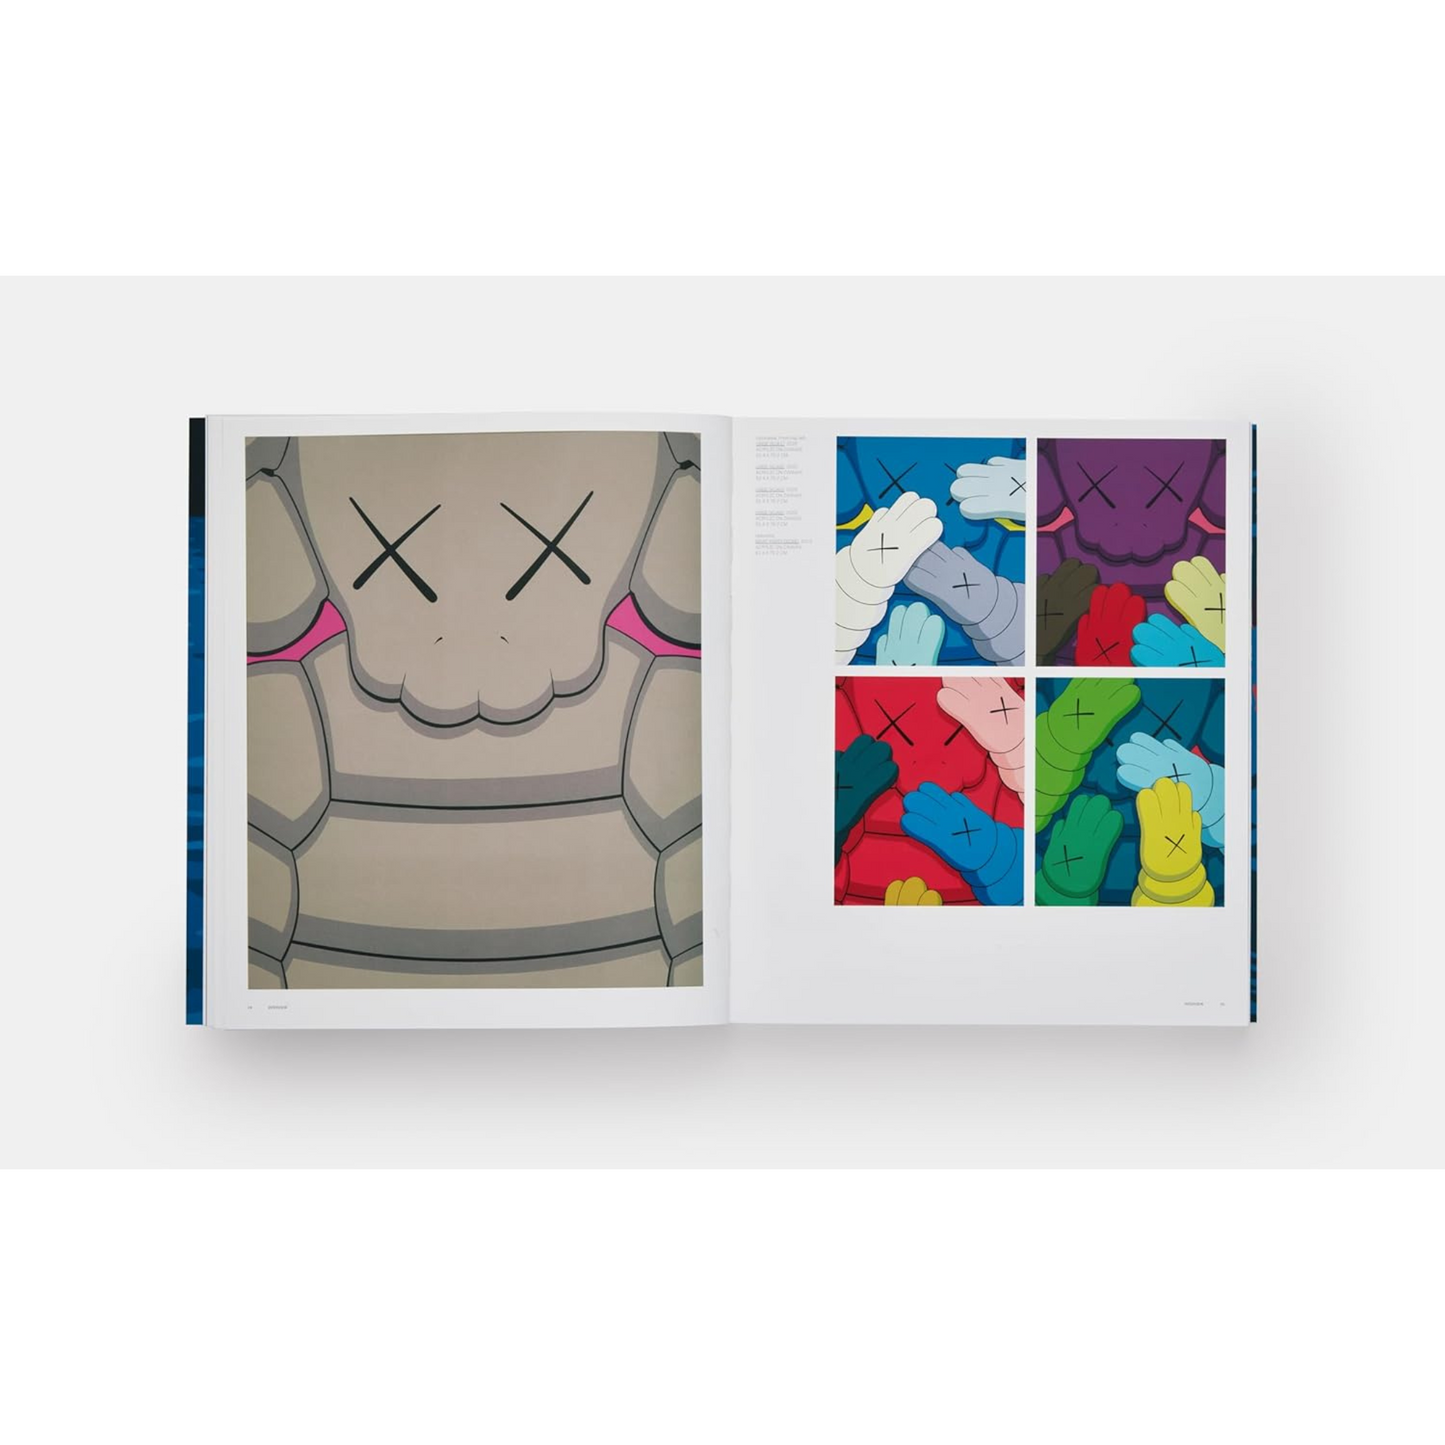 Internal double page spread with five colourful KAWS illustrations.